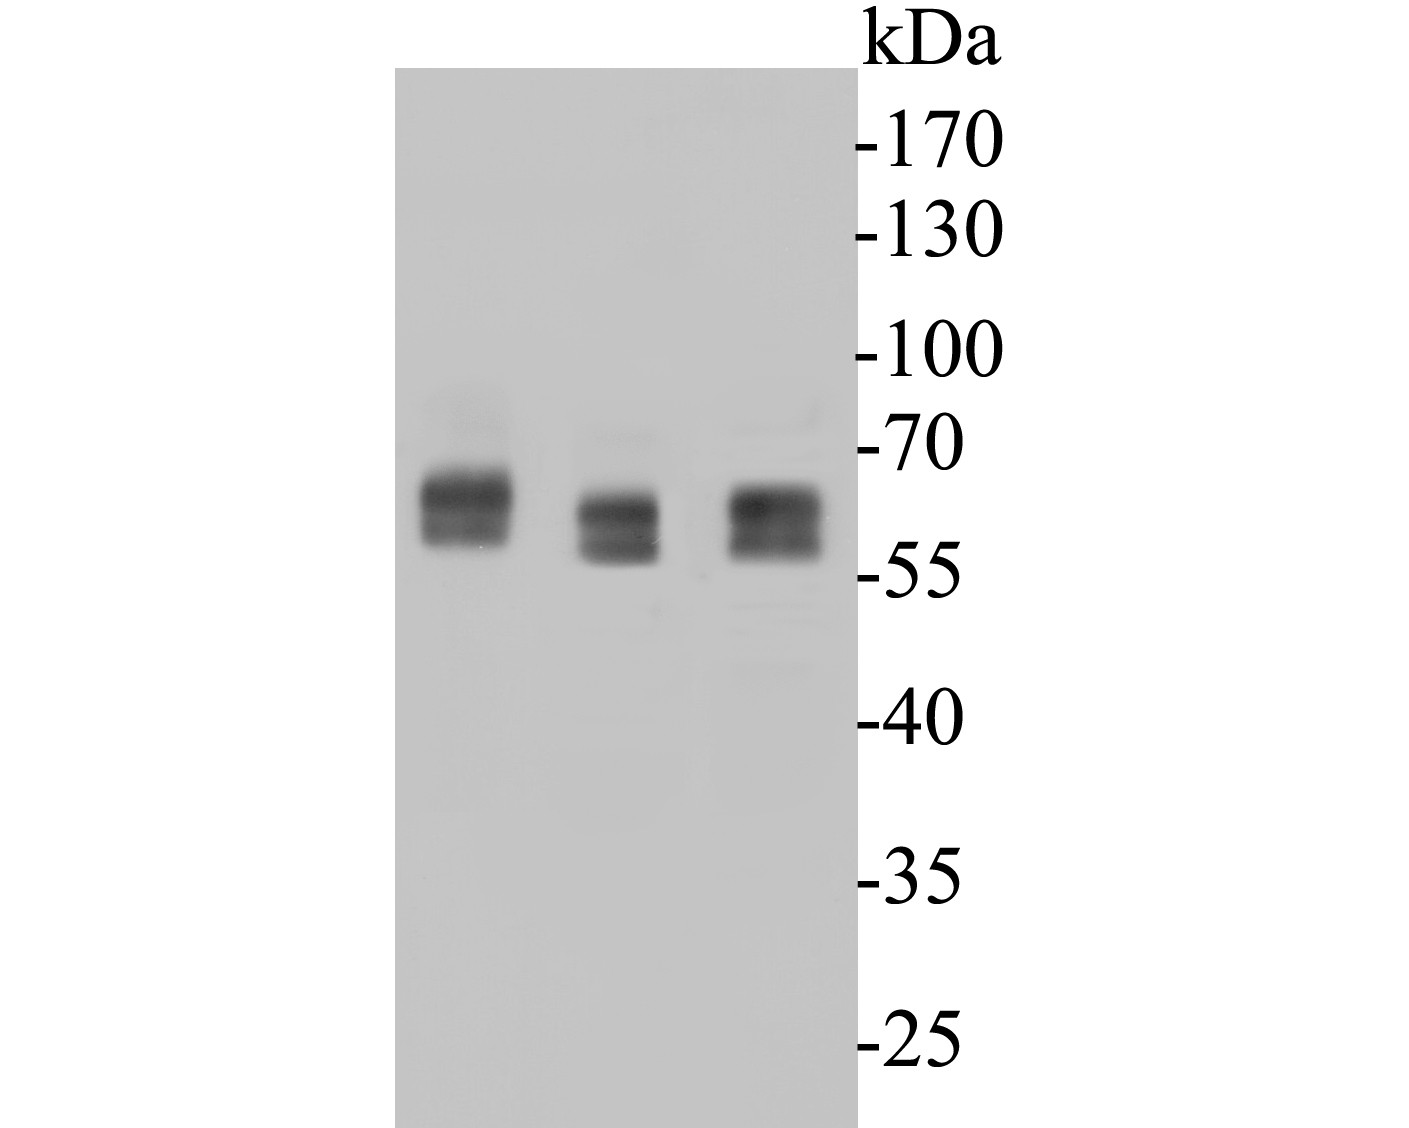 Western blot analysis of KCNAB1 on different lysates. Proteins were transferred to a PVDF membrane and blocked with 5% BSA in PBS for 1 hour at room temperature. The primary antibody (ER1901-34, 1/500) was used in 5% BSA at room temperature for 2 hours. Goat Anti-Rabbit IgG - HRP Secondary Antibody (HA1001) at 1:200,000 dilution was used for 1 hour at room temperature.<br />
Positive control: <br />
Lane 1: Mouse brain tissue lysates<br />
Lane 2: Rat brain tissue lysates<br />
Lane 3: Rat cerebellum tissue lysates